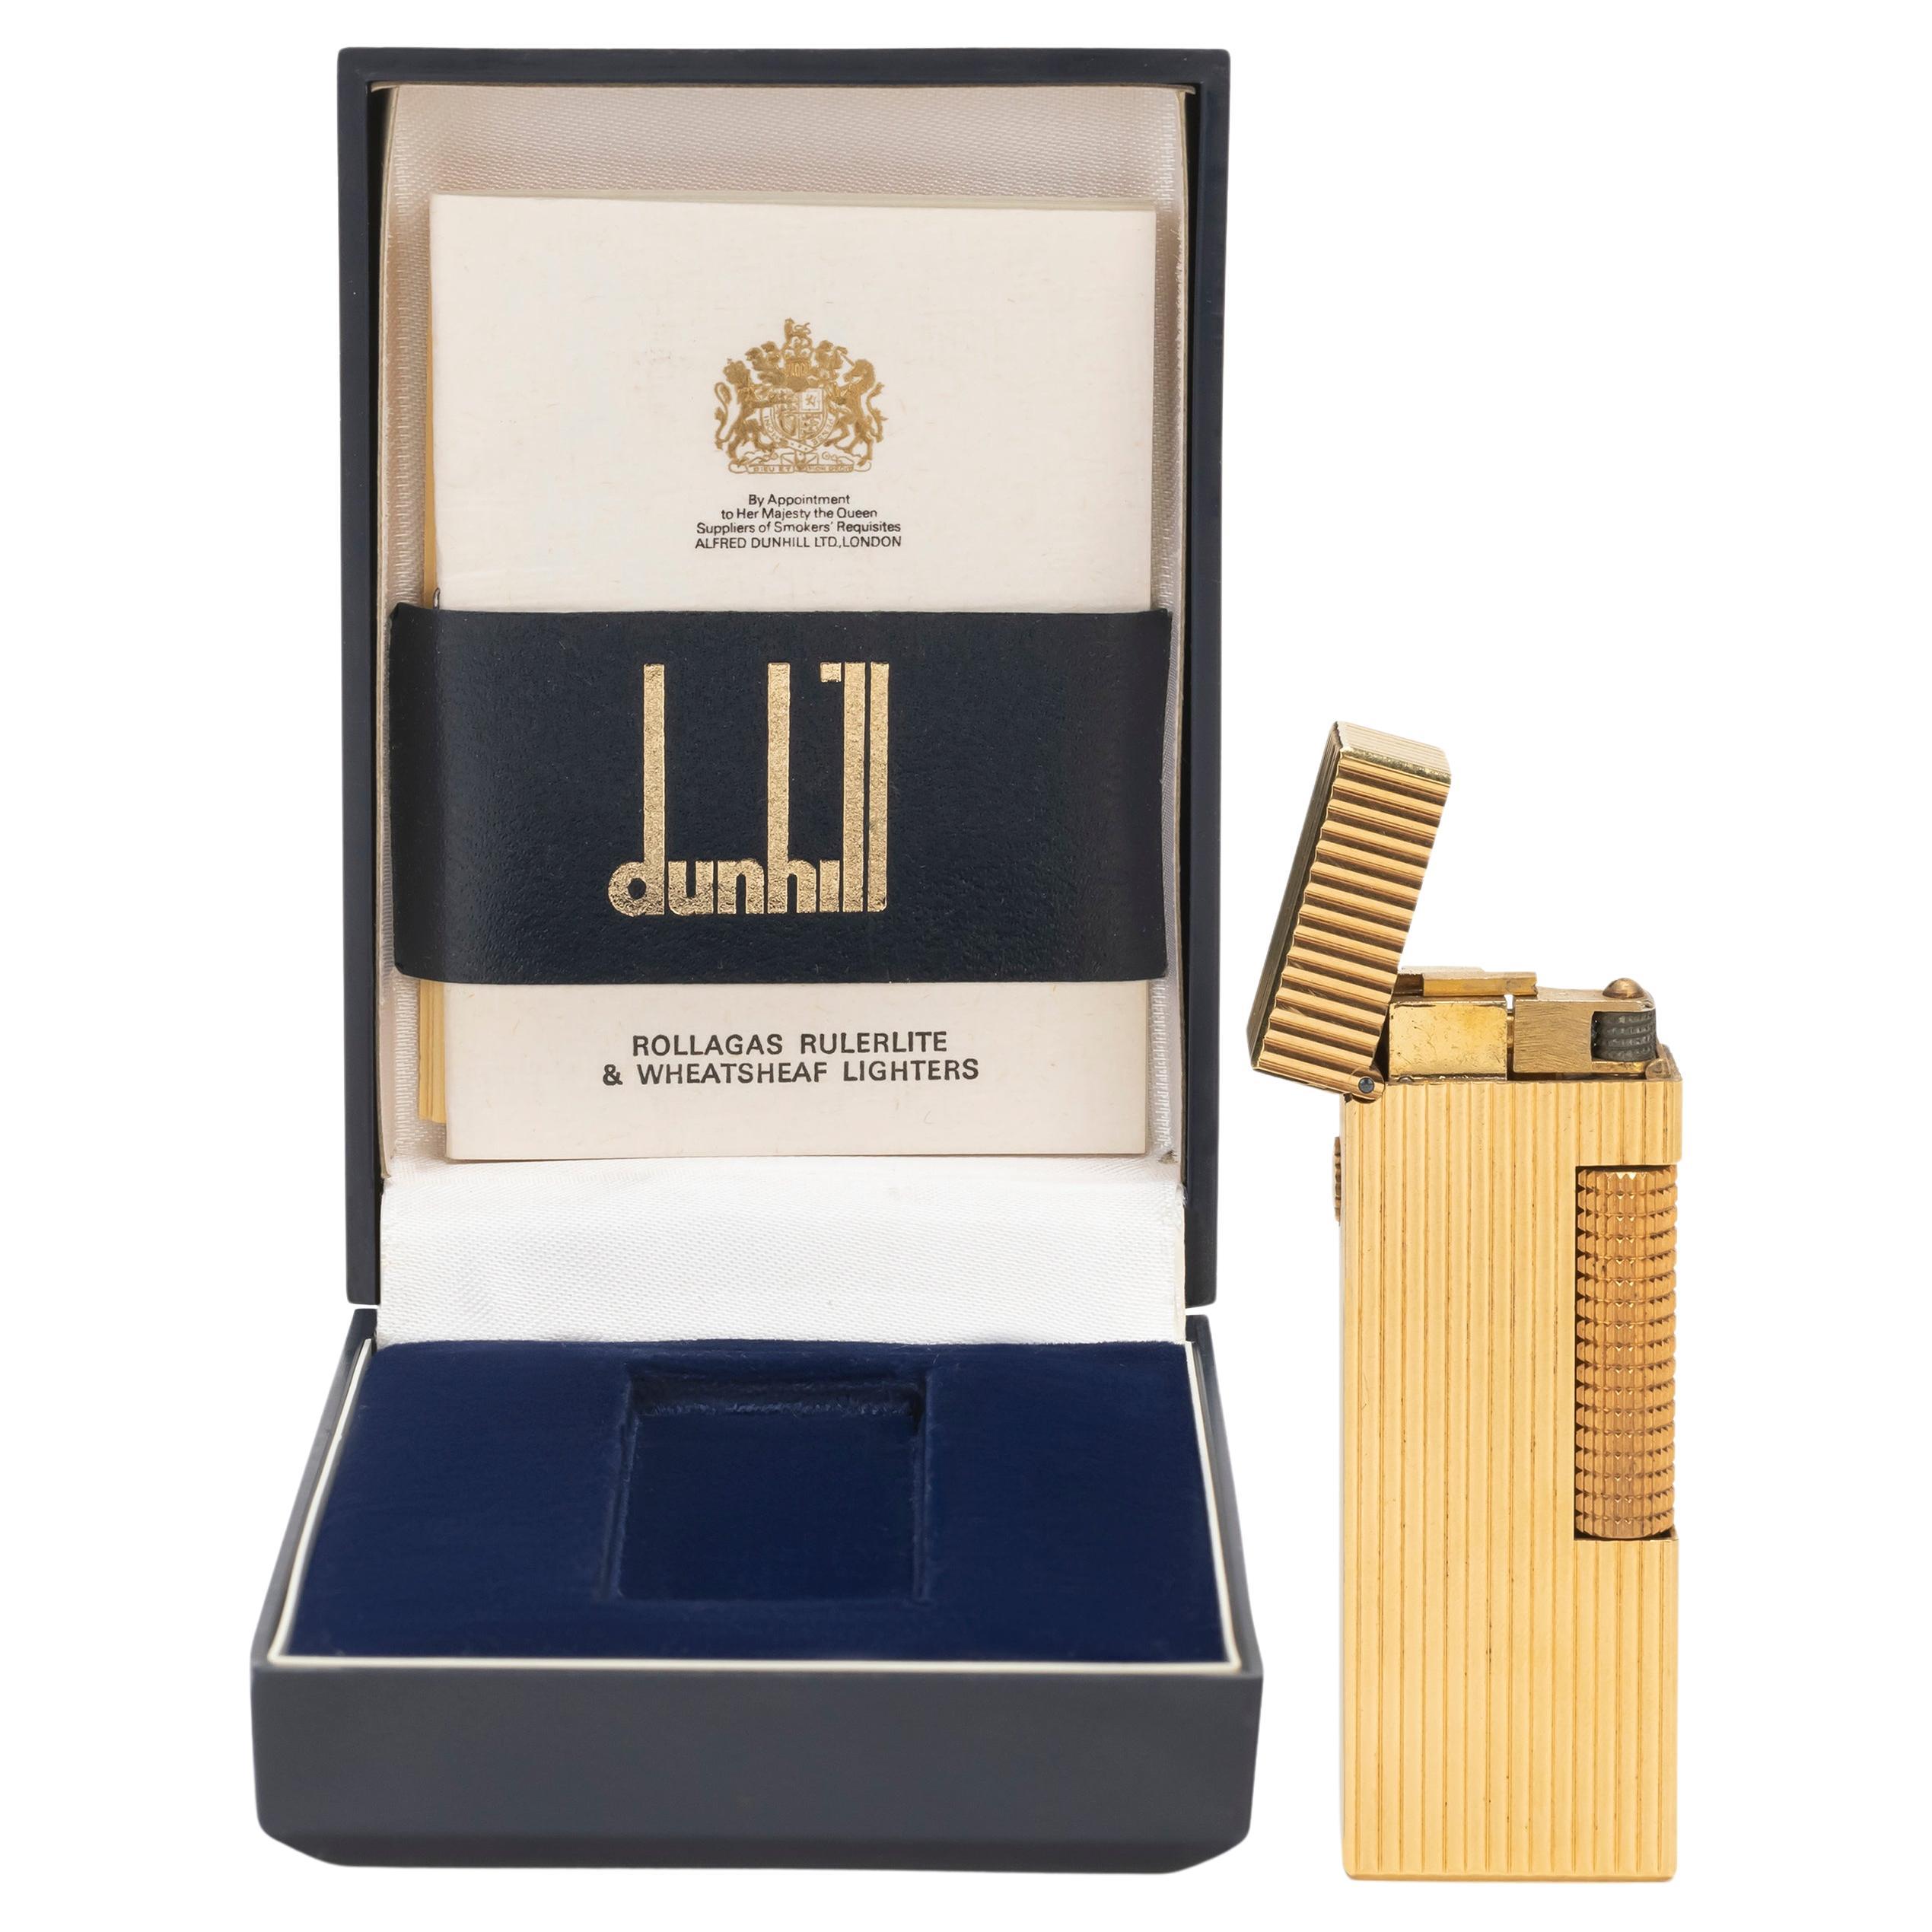 Original James Bond Iconic Vintage Dunhill Gold Plated Swiss Made ...